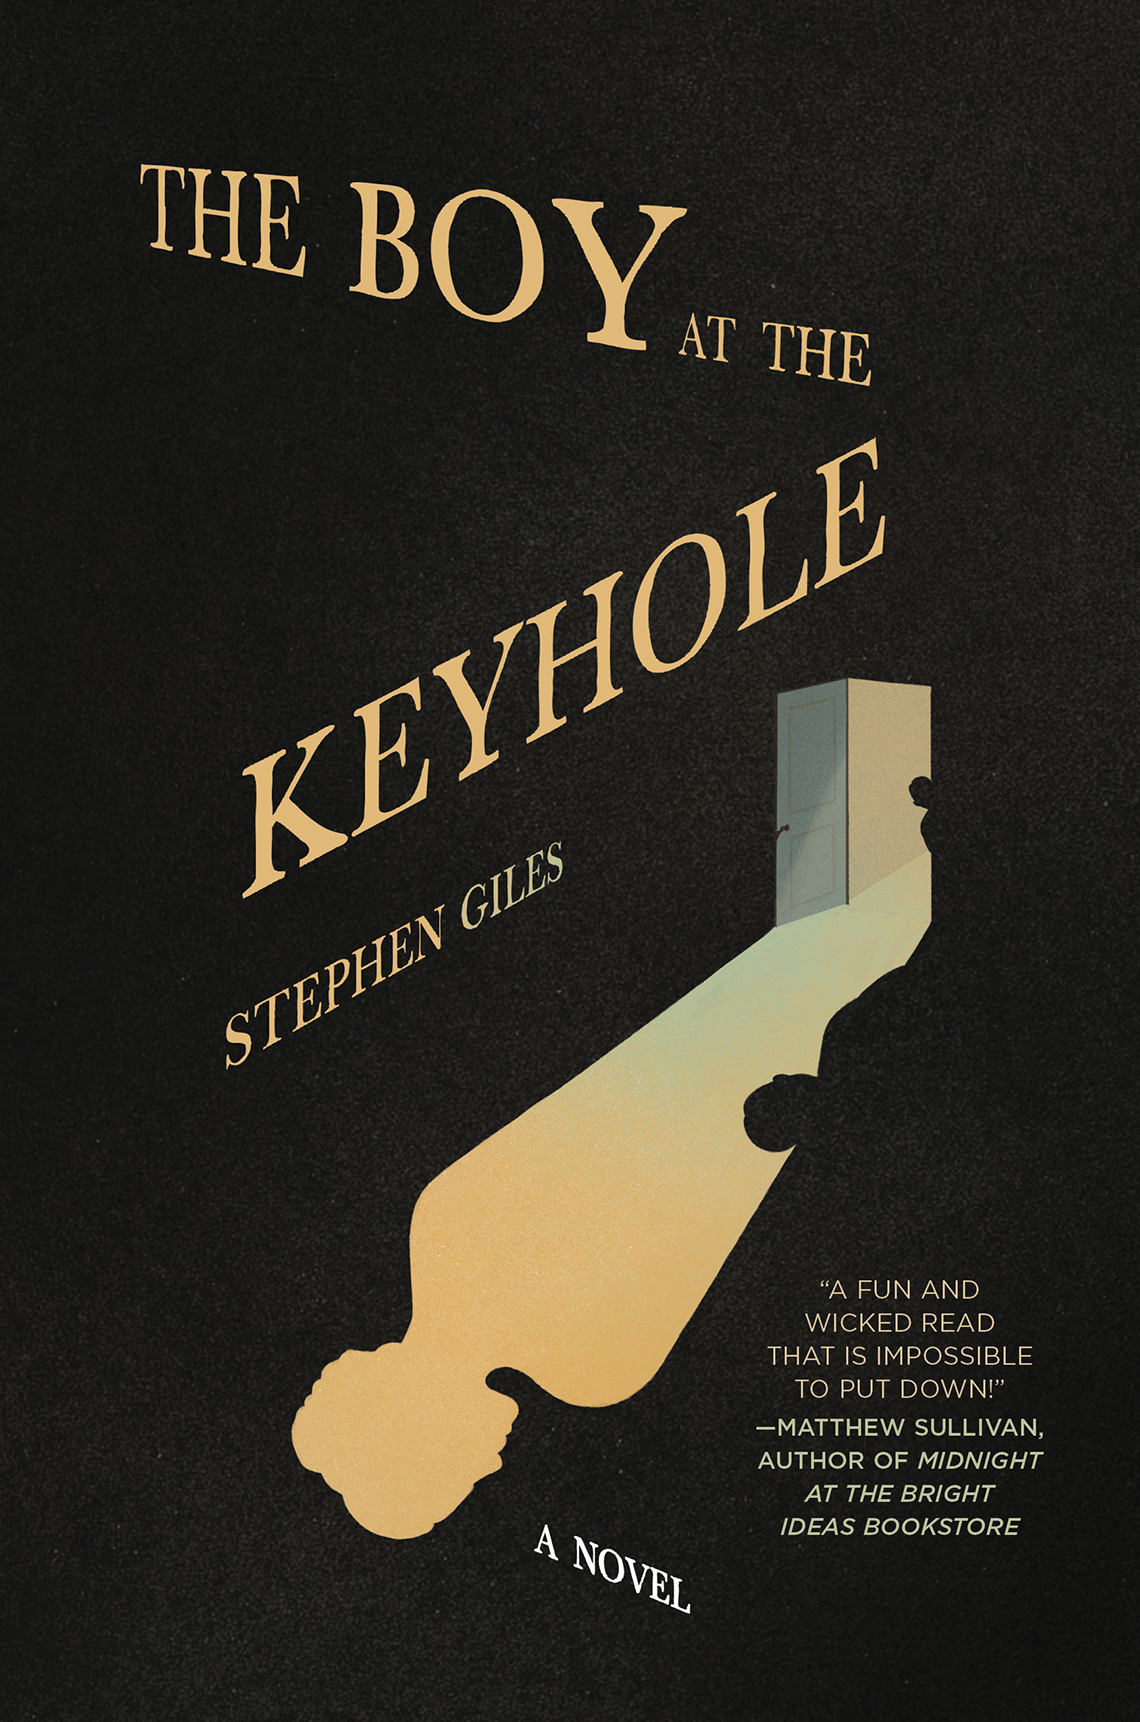 Book cover reads The Boy at the Keyhole, Stephen Giles Novel.